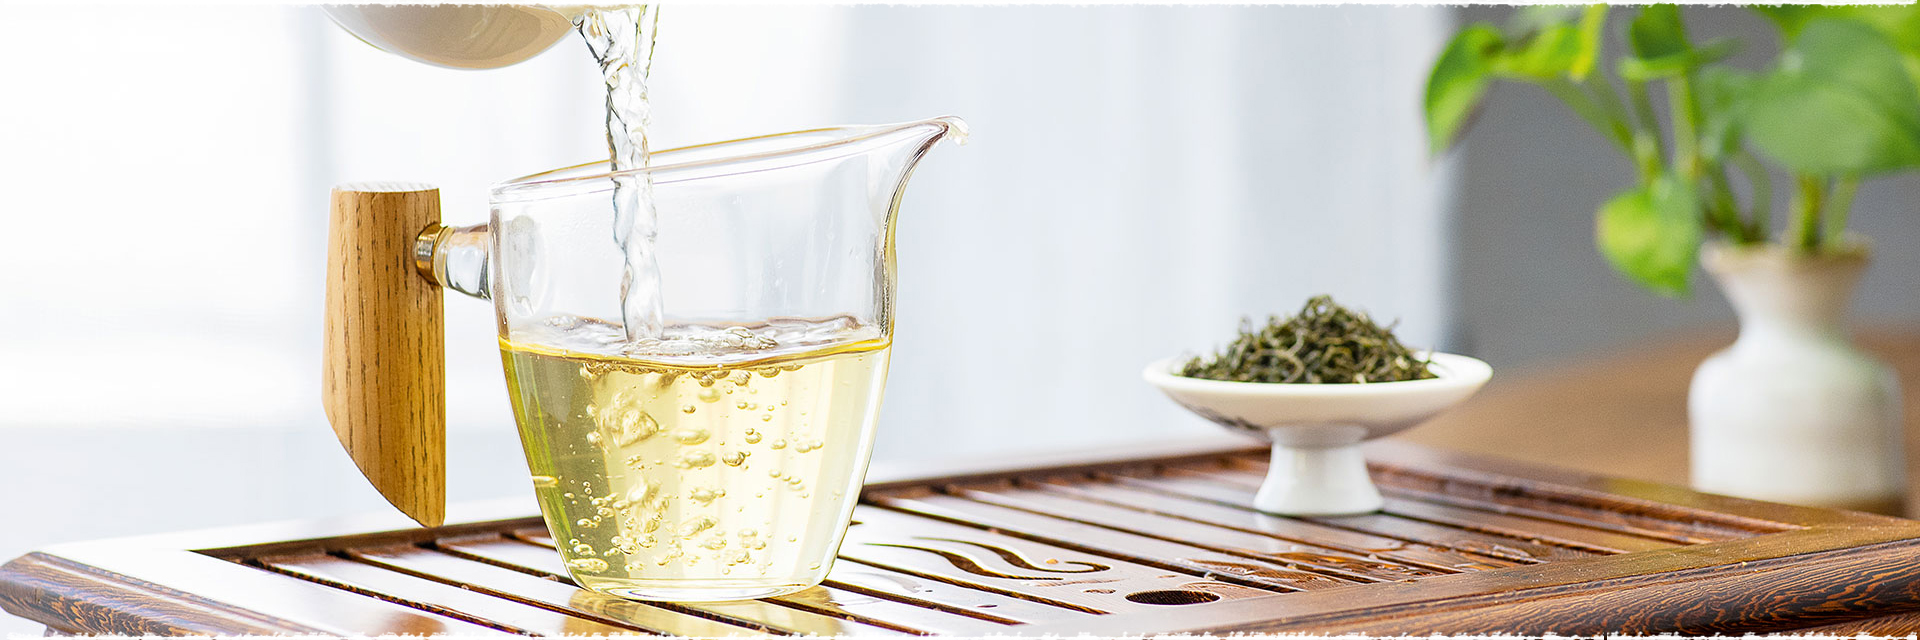 The Four Sub-categories of Green Tea